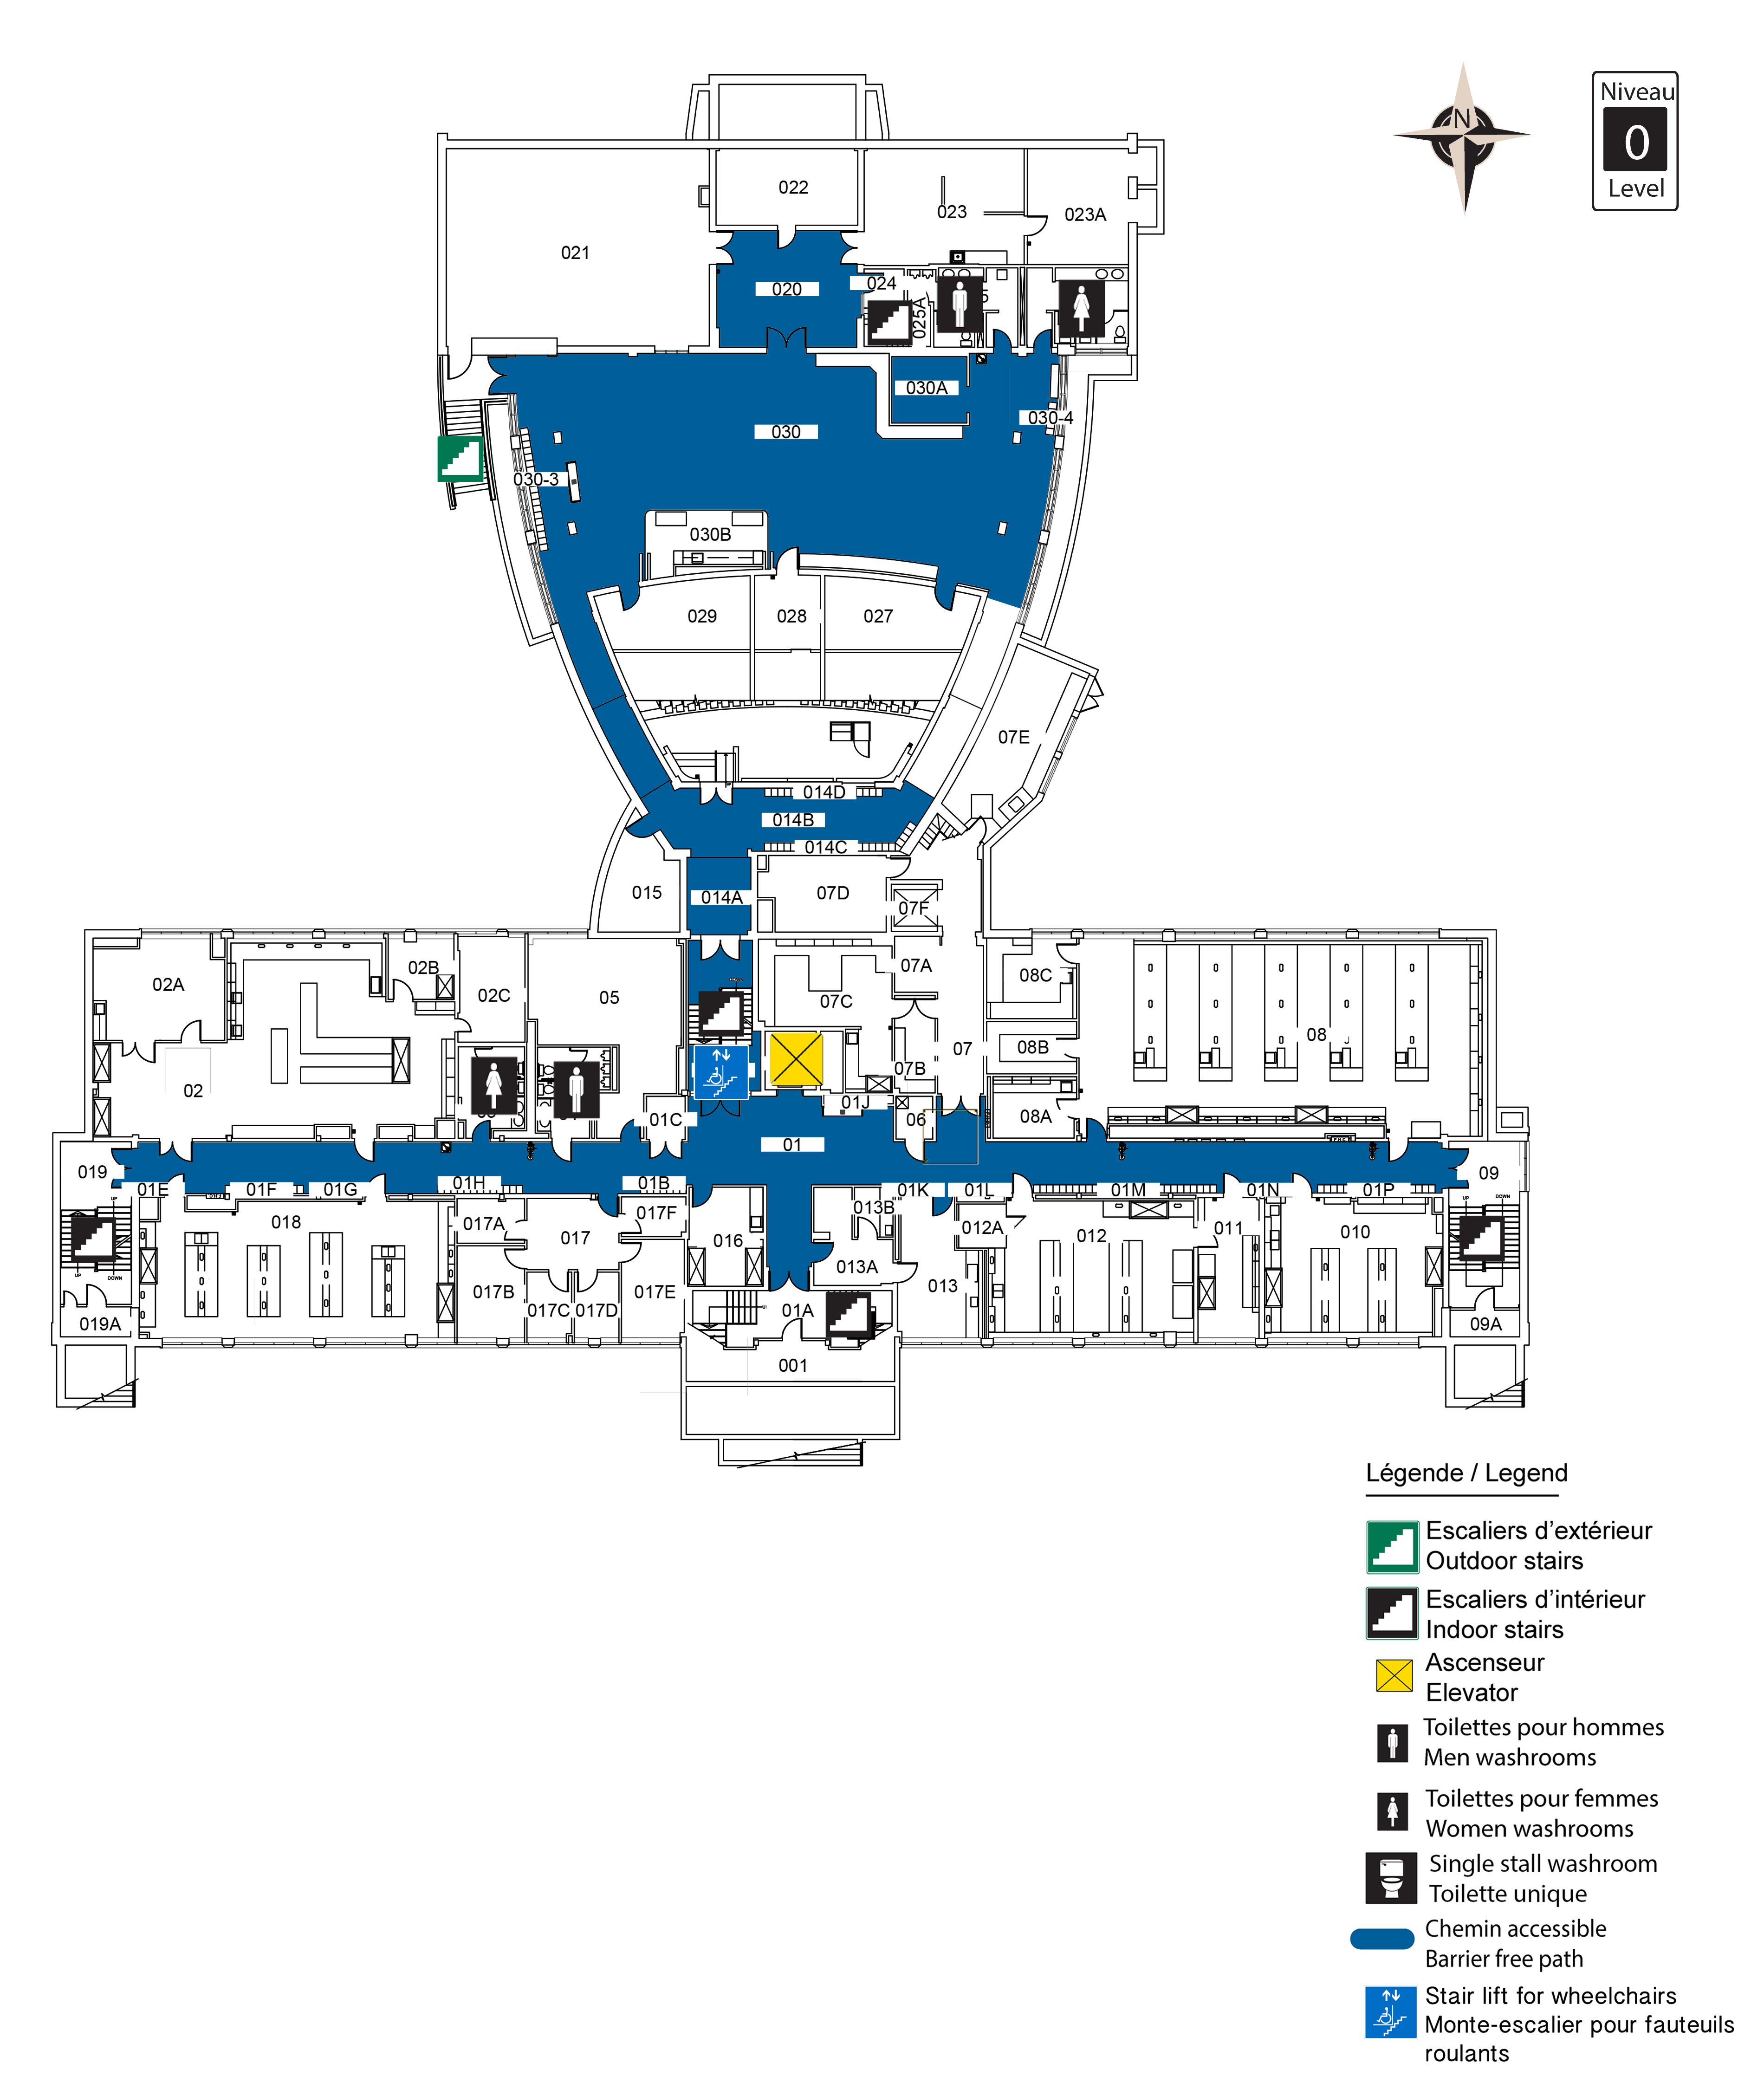 Accessible map - MRN level 0